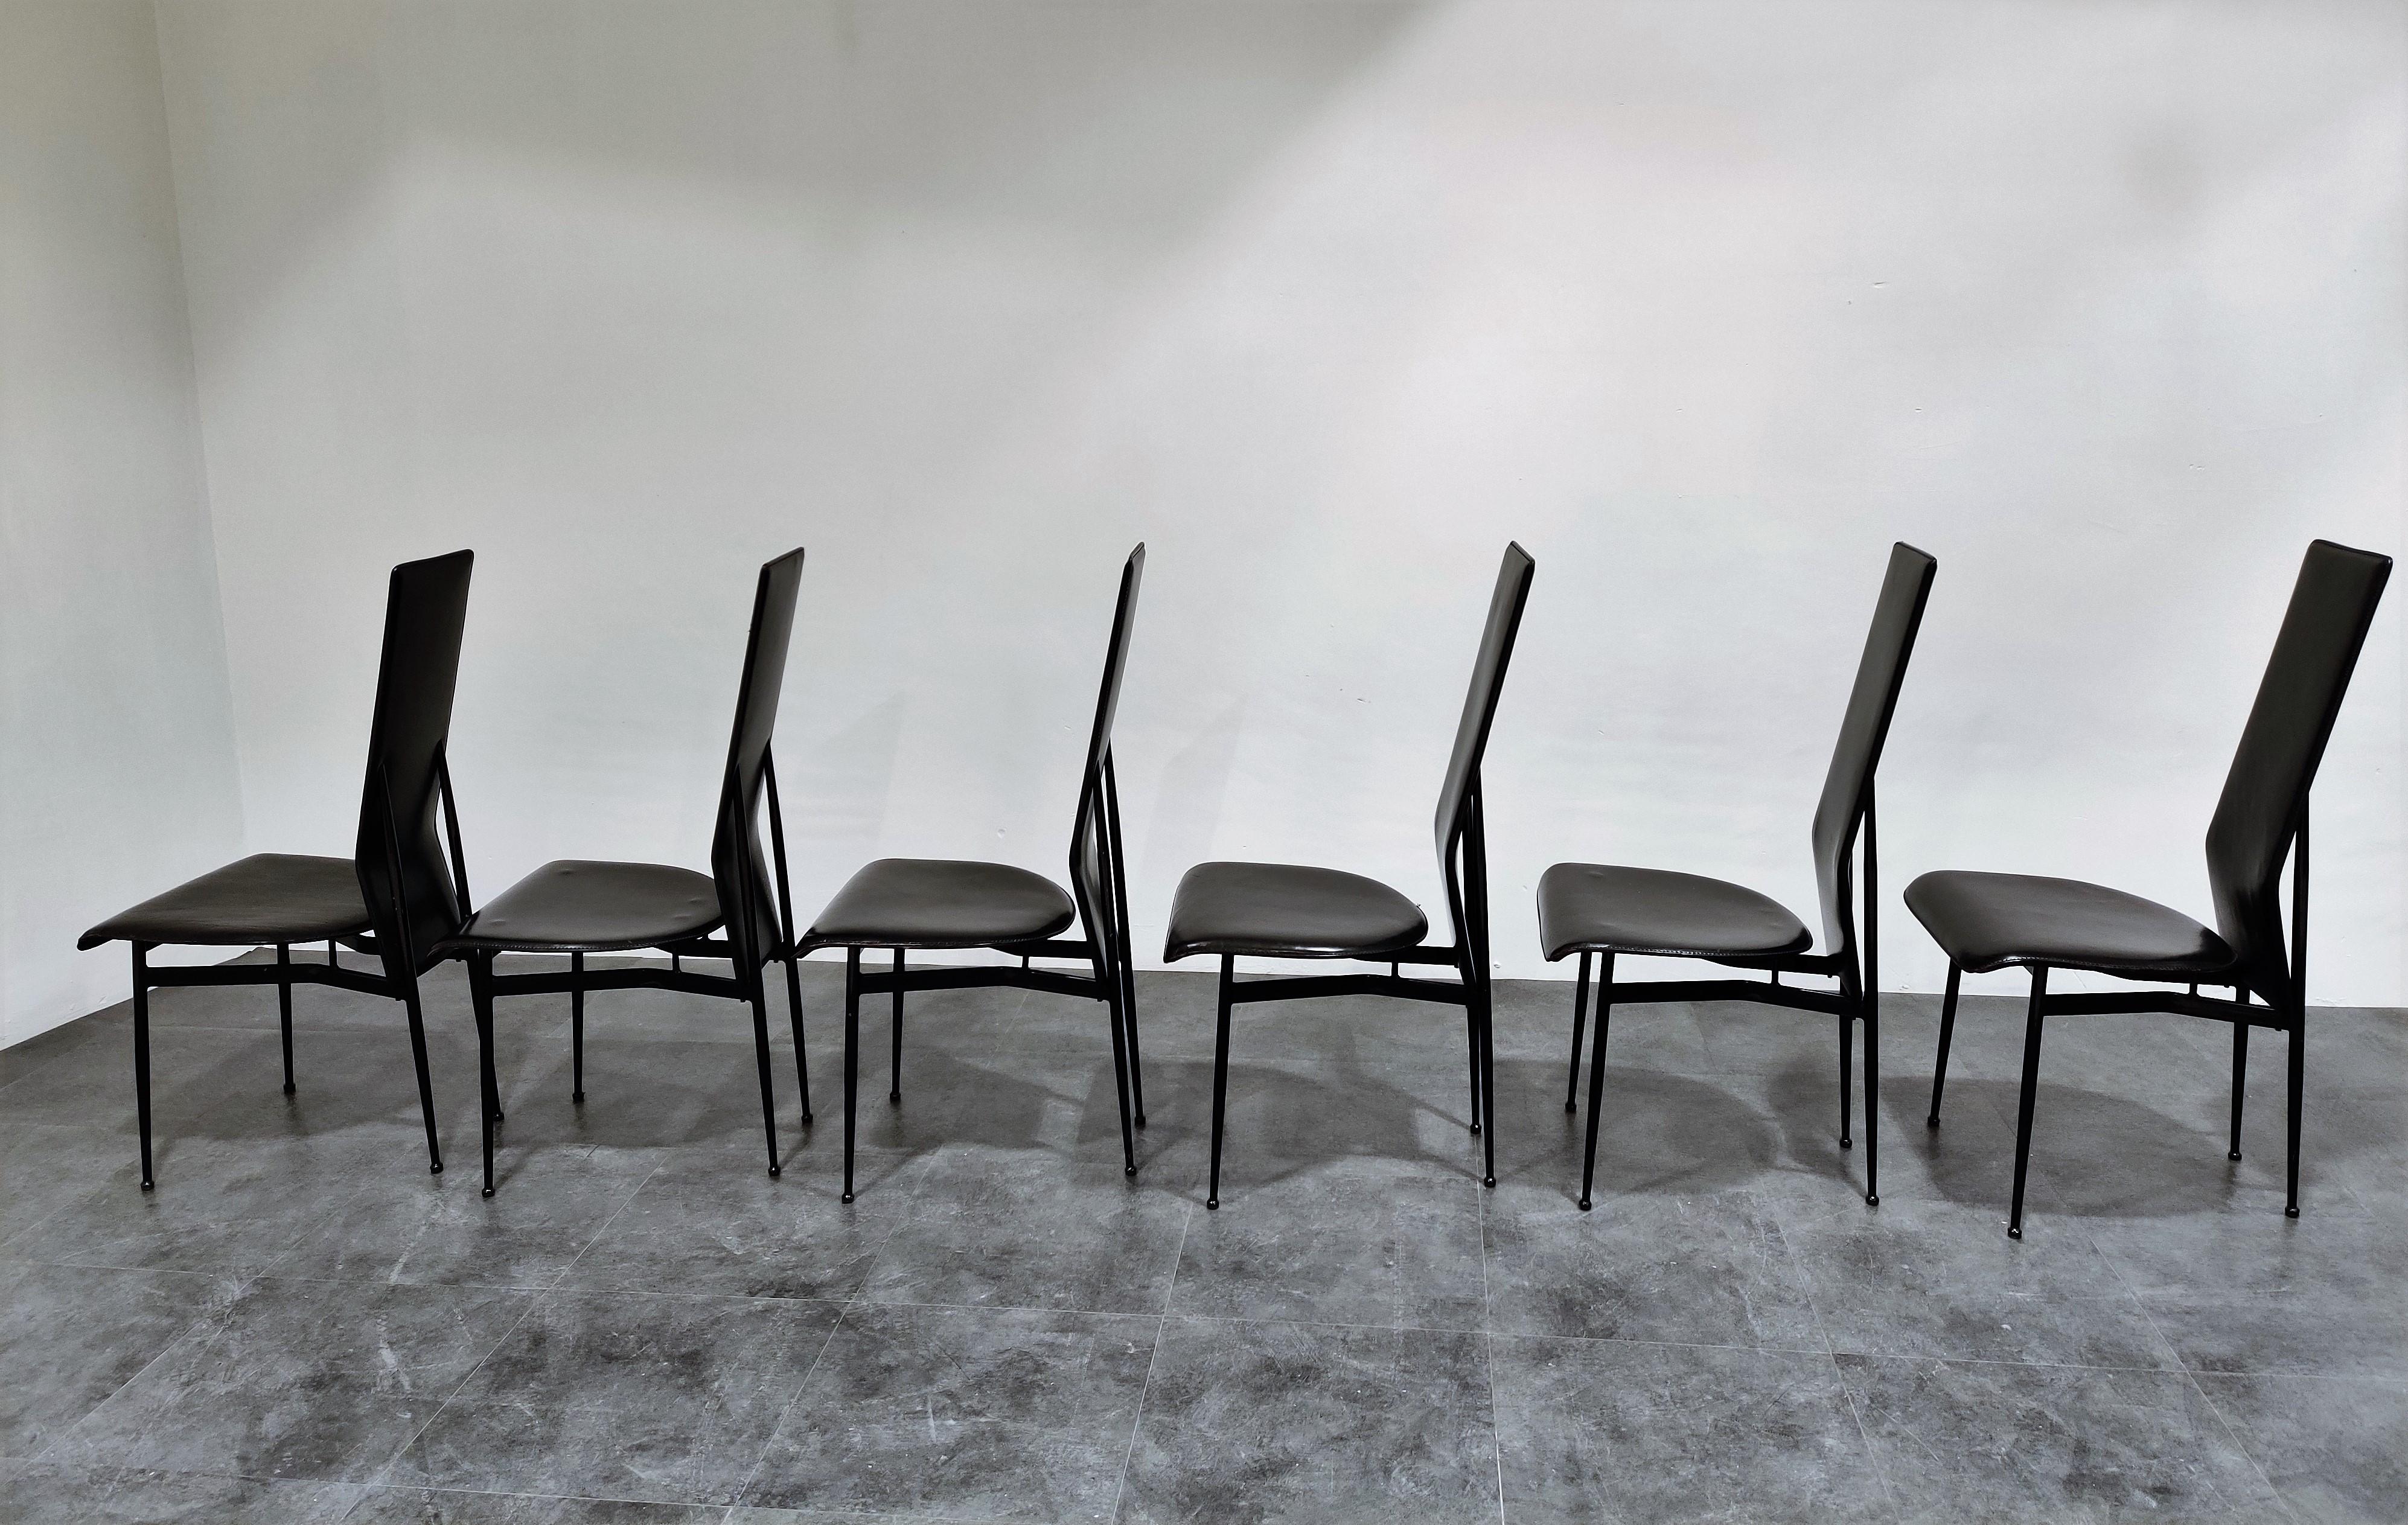 Set of 6 leather dining chairs designed by Giancarlo Vegni for Fasem italy.

The chair seat well, are beautifully designed and made from quality materials.

Notice the beautiful legs.

The chairs are in very good condition with minimal